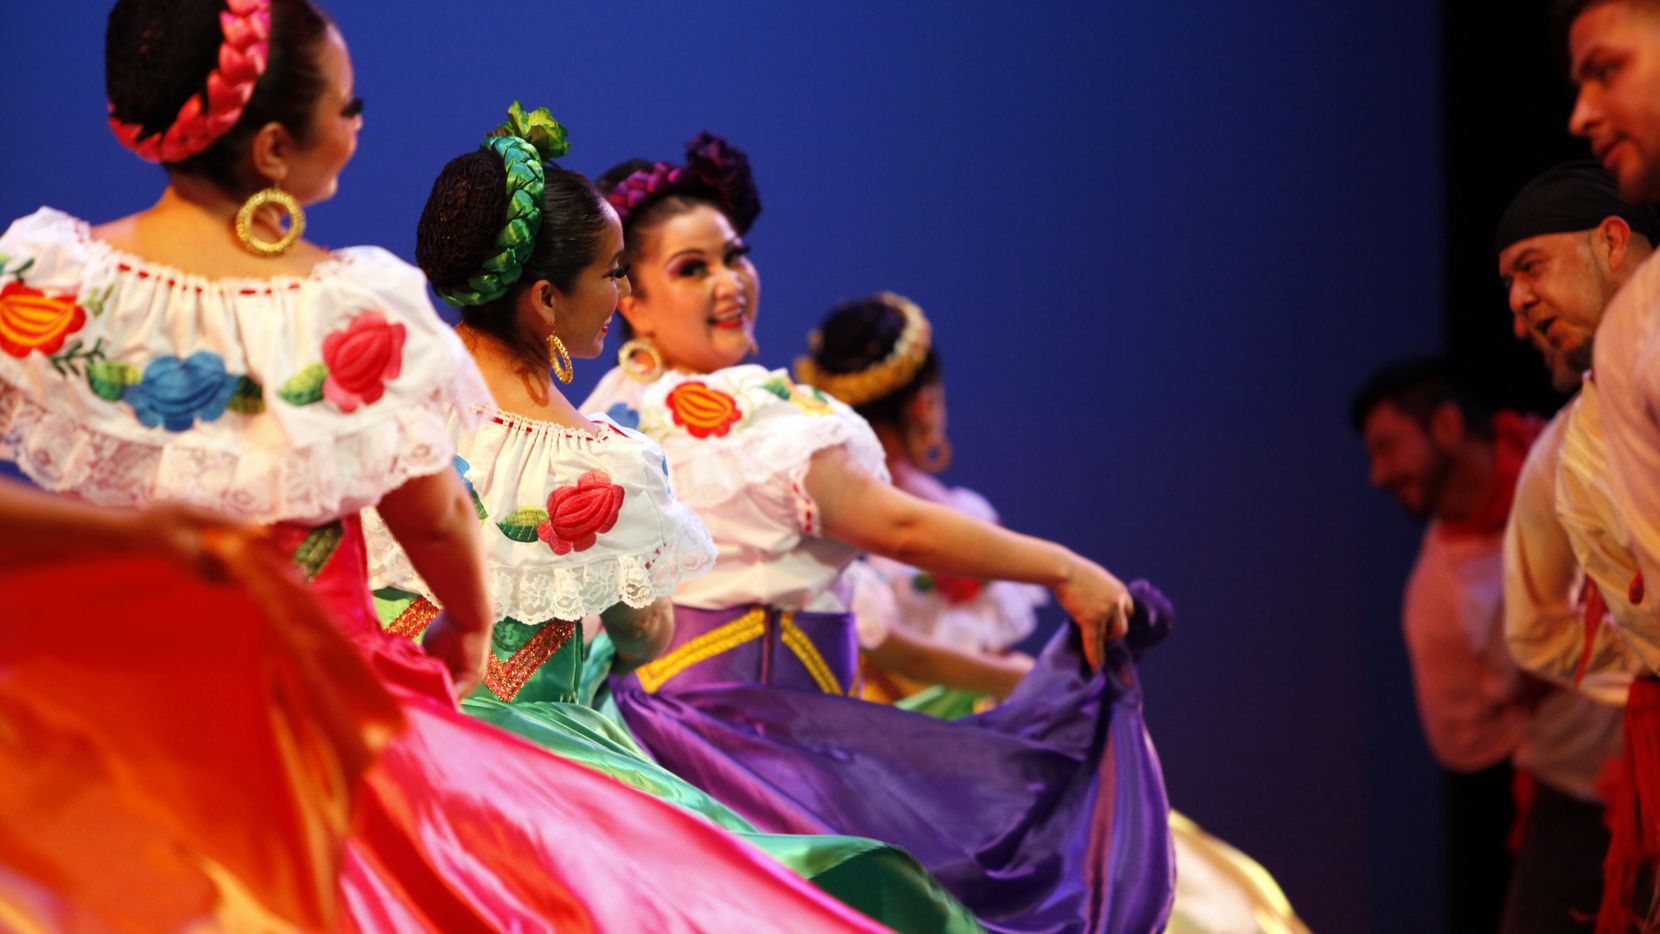 Ballet Folklorico by Mexico 2000 performs at the Granville Arts Center. (File photo)